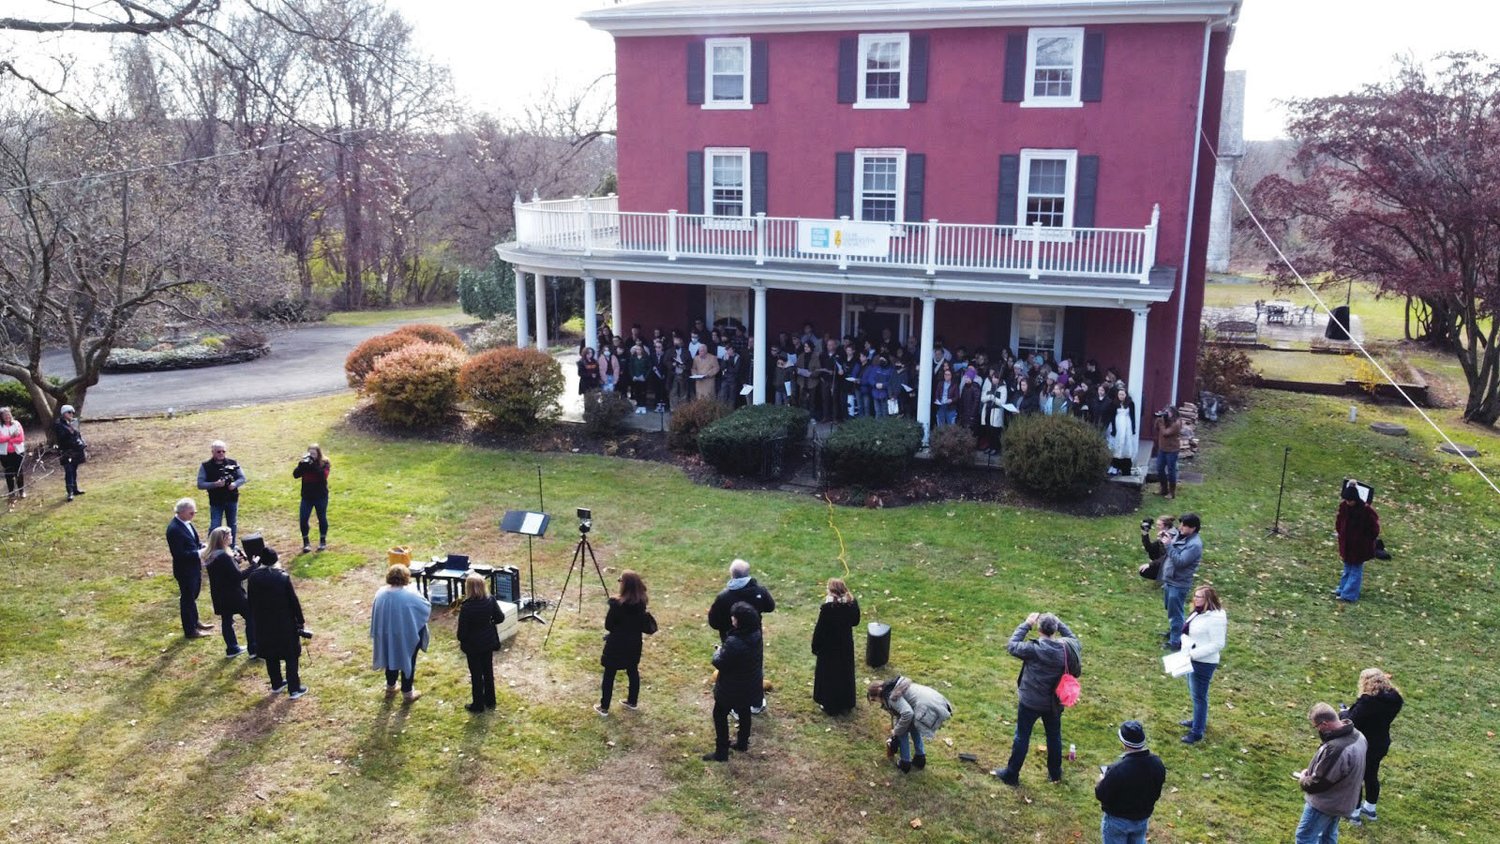 A drone camera caught the scene from above as photographers gathered to photograph singers on the porch at Highland Farm, in Doylestown Township, the former home of Broadway lyricist Oscar Hammerstein II. The event was a tribute to composer and lyricist Stephen Sondheim, a Hammerstein protege, who once lived in the house. Sondheim died Nov. 27 at 91. Highland Farm is now the Oscar Hammerstein Museum.